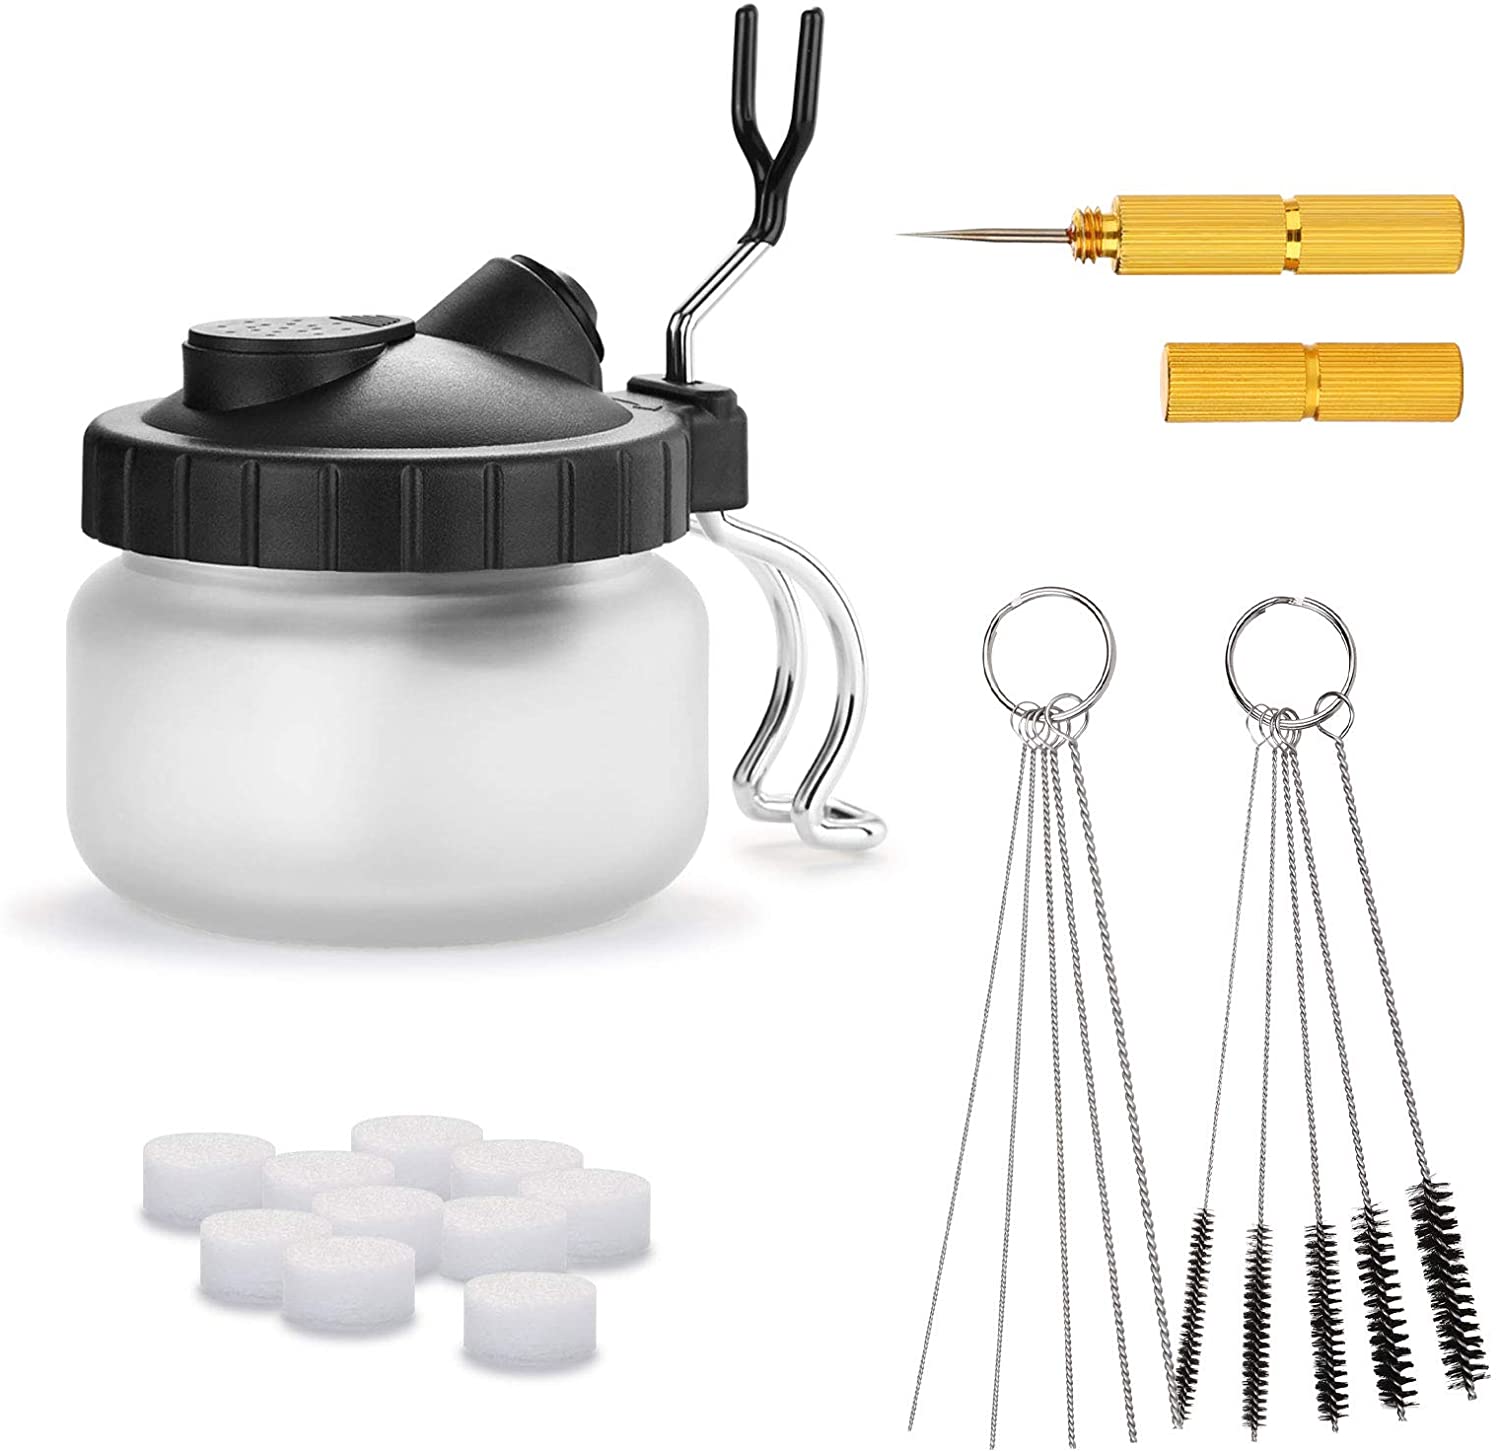 Master Airbrush 3-in-1 Cleaning Pot with Holder; Cleans and Holds Airbrush,  Color Palette Lid